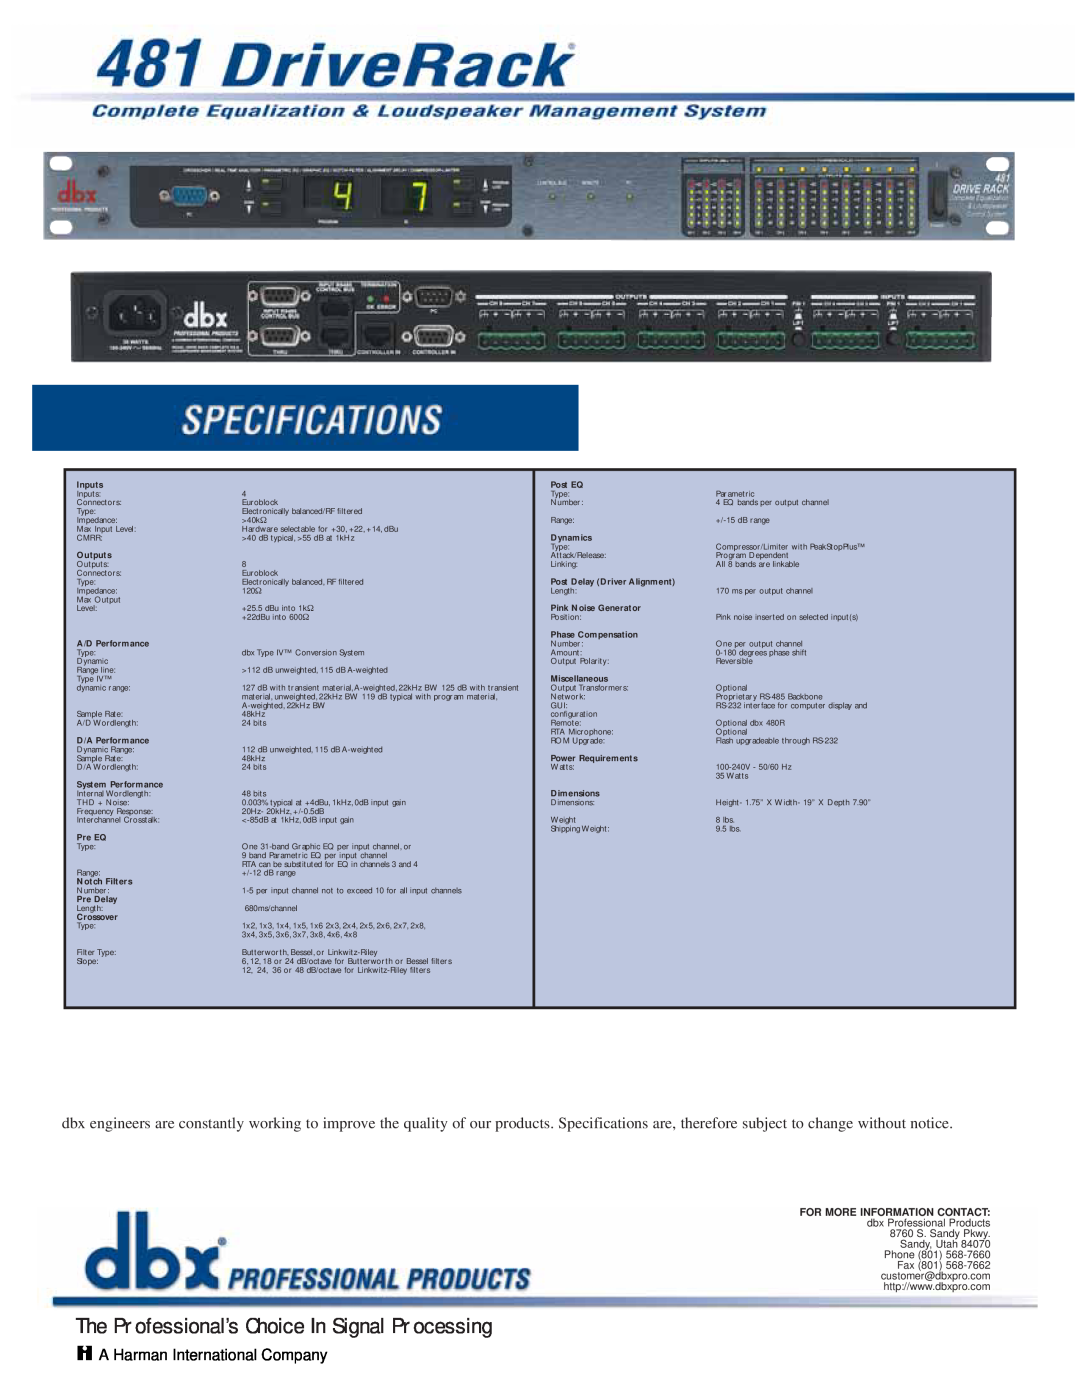 dbx Pro 481 DriveRack manual The Professional’s Choice In Signal Processing, A Harman International Company 